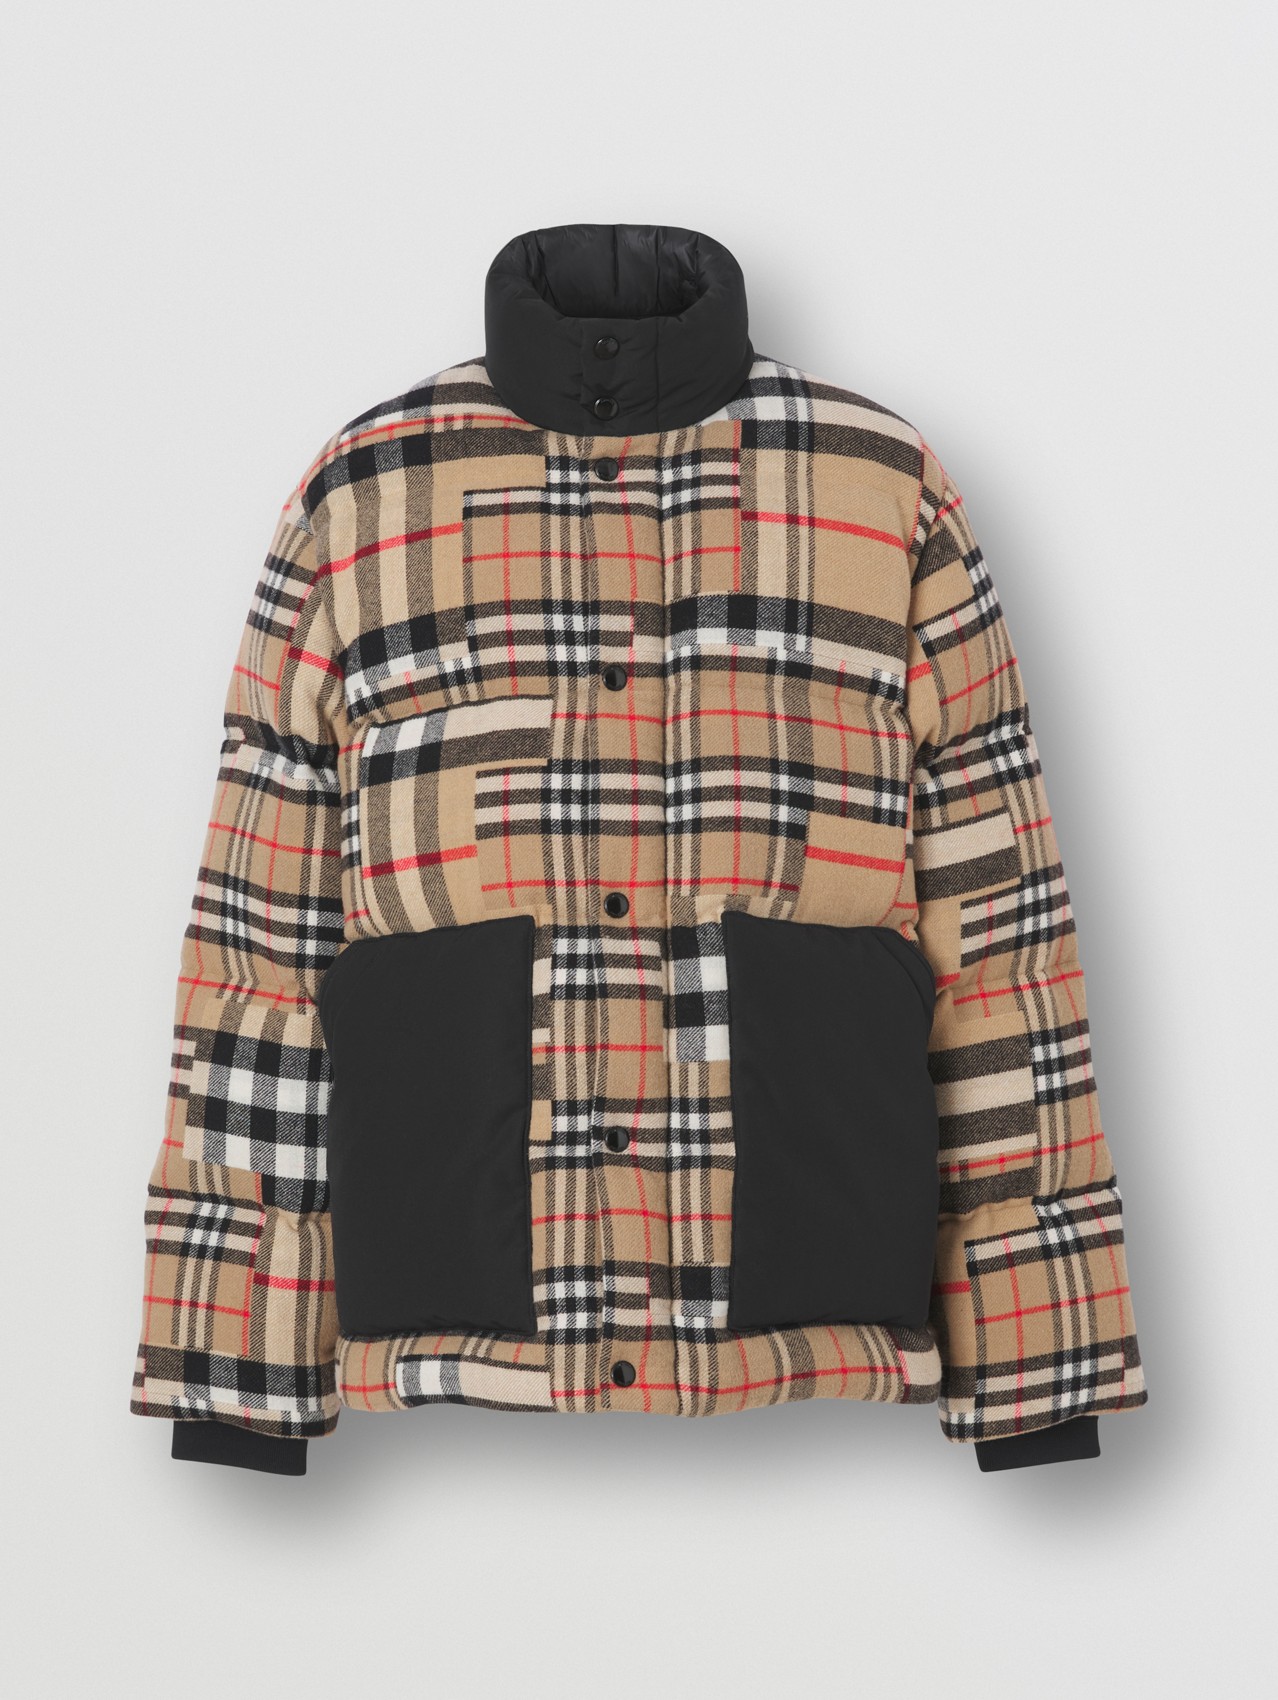 Patchwork Check Down-filled Wool Jacket in Archive Beige